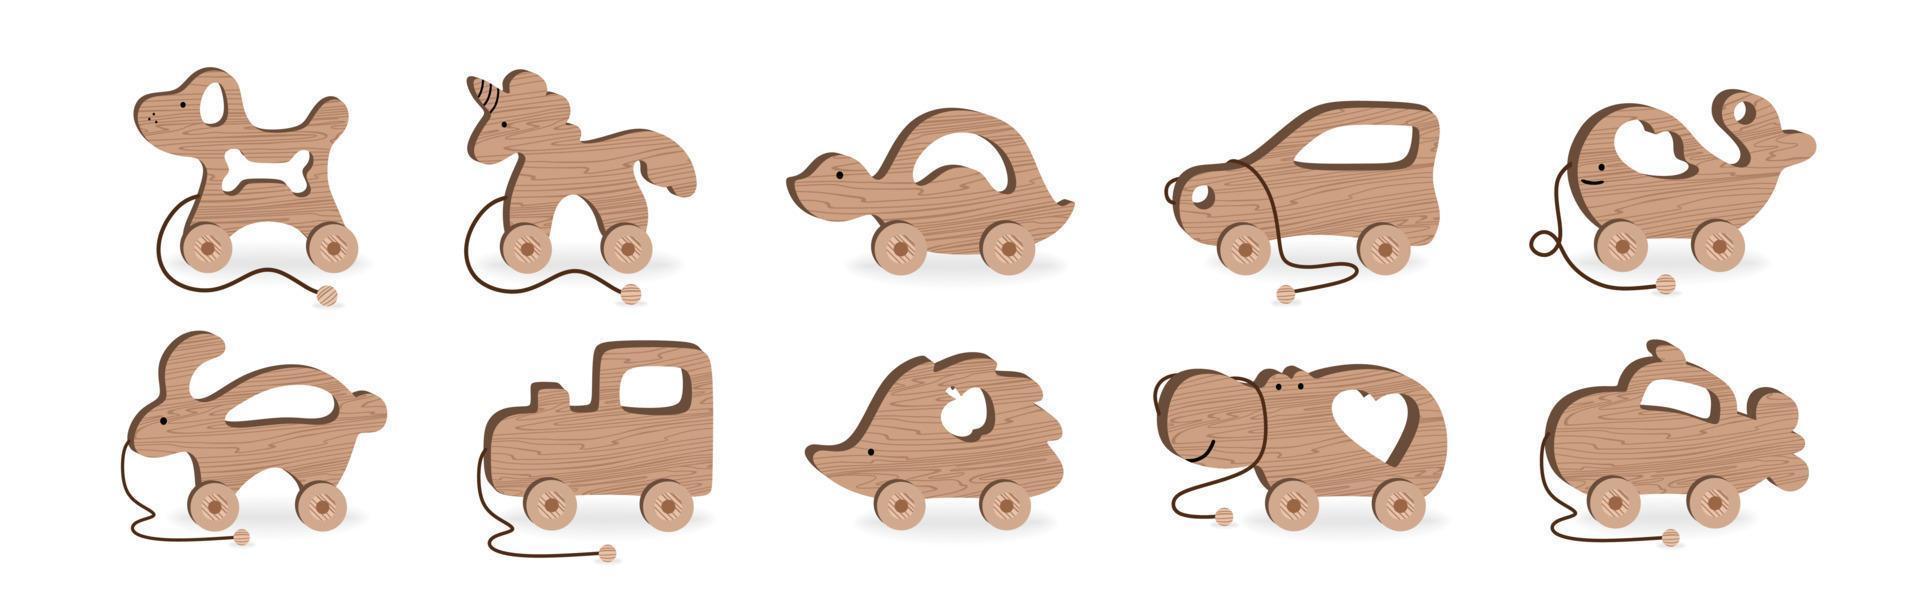 Children's toys for Children's Games and Entertainment set Wooden Hedgehog machine Hippo Whale Submarine Turtle Vector Illustration